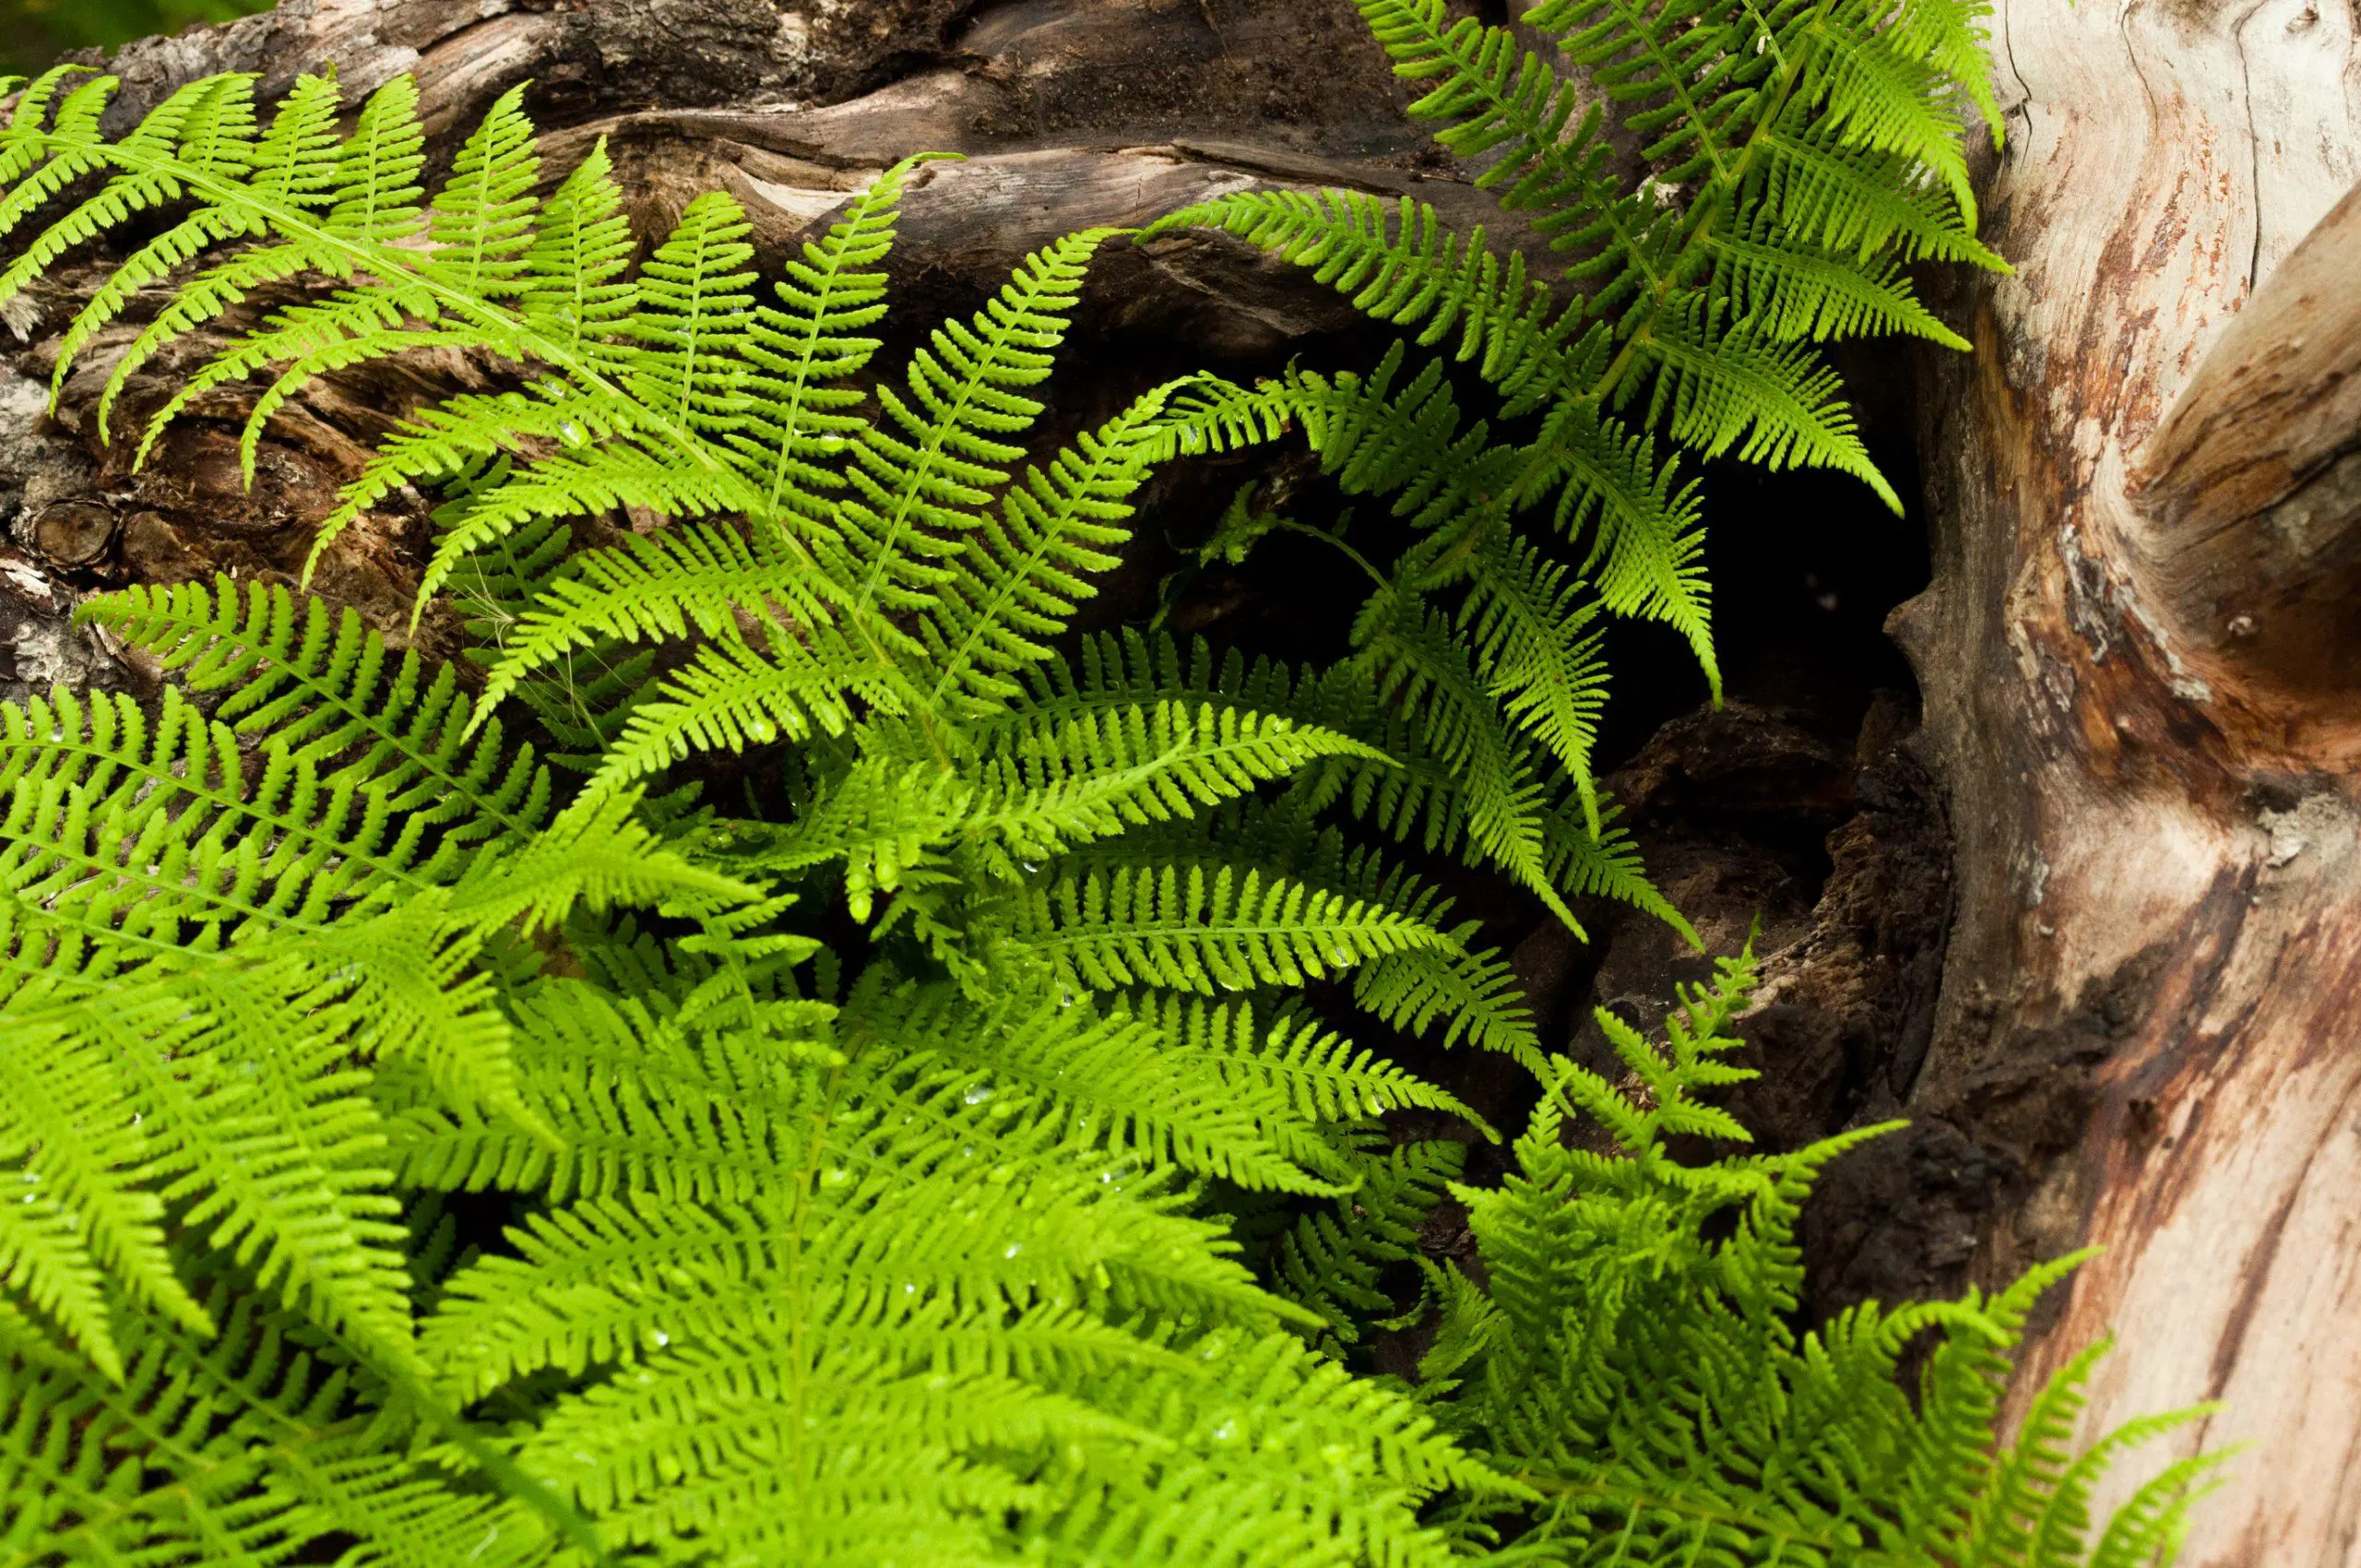 Ferns growing opening and purifying the air around them